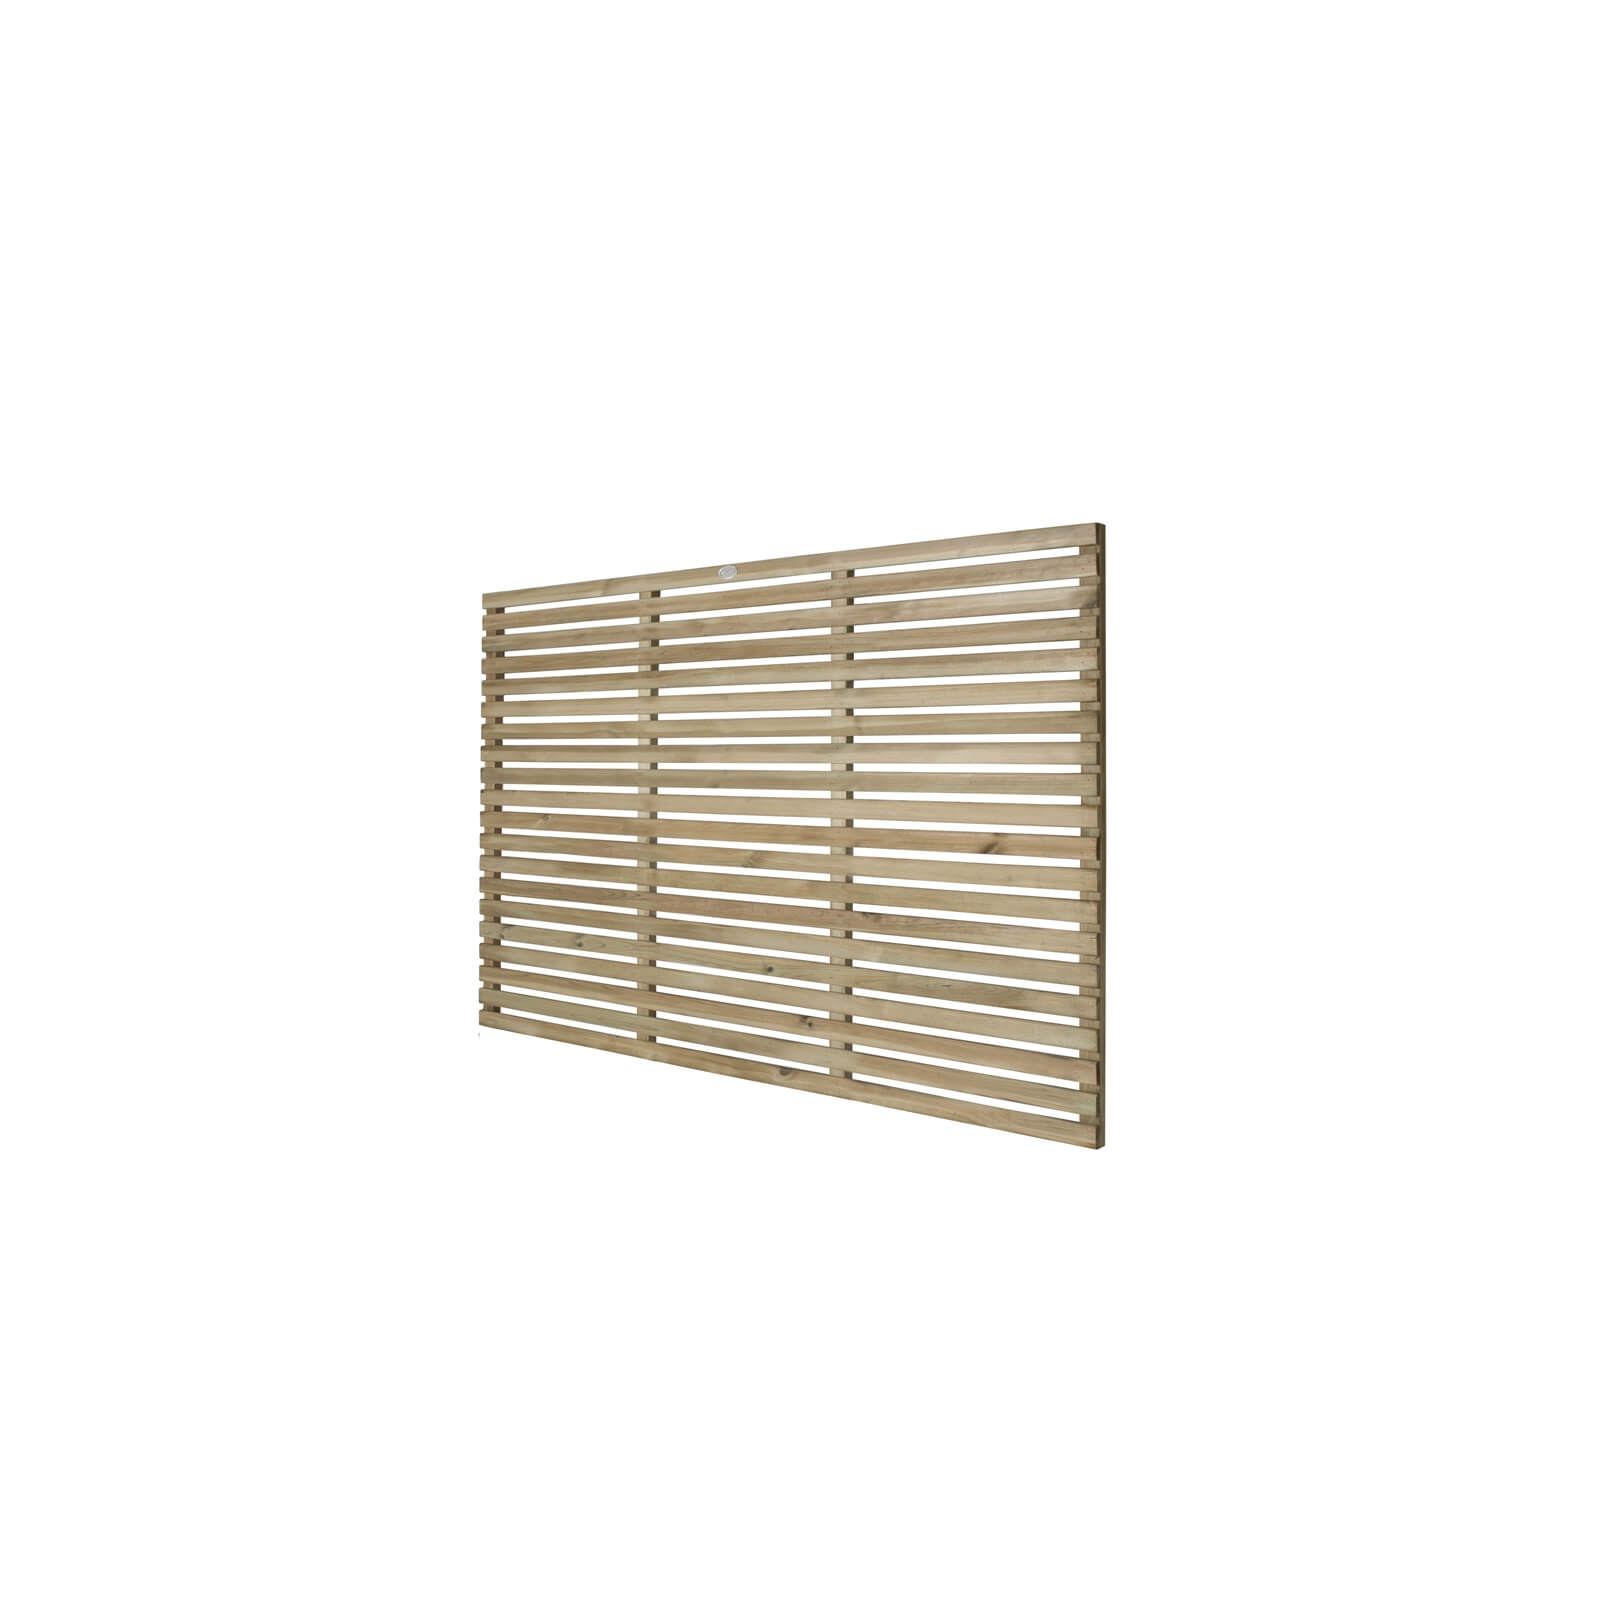 6ft x 4ft (1.8m x 1.2m) Pressure Treated Contemporary Slatted Fence Panel - Pack of 4